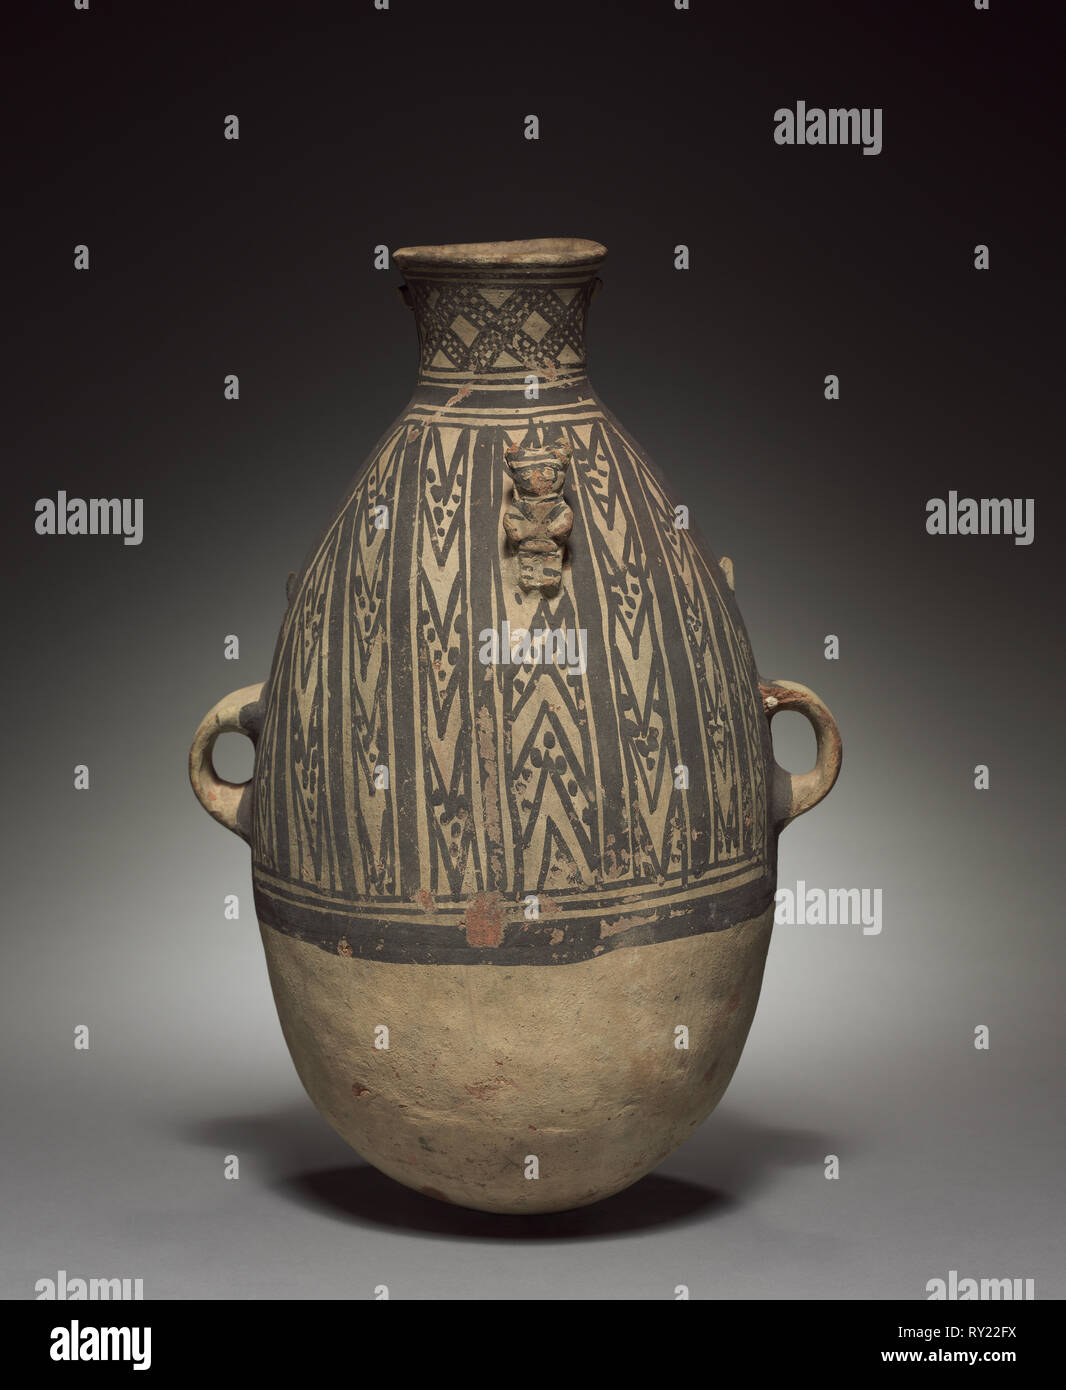 Bottle, 800-1500. Peru, Chimu, 9th-15th Century. Pottery; overall: 40.1 x 25.7 x 23.5 cm (15 13/16 x 10 1/8 x 9 1/4 in Stock Photo